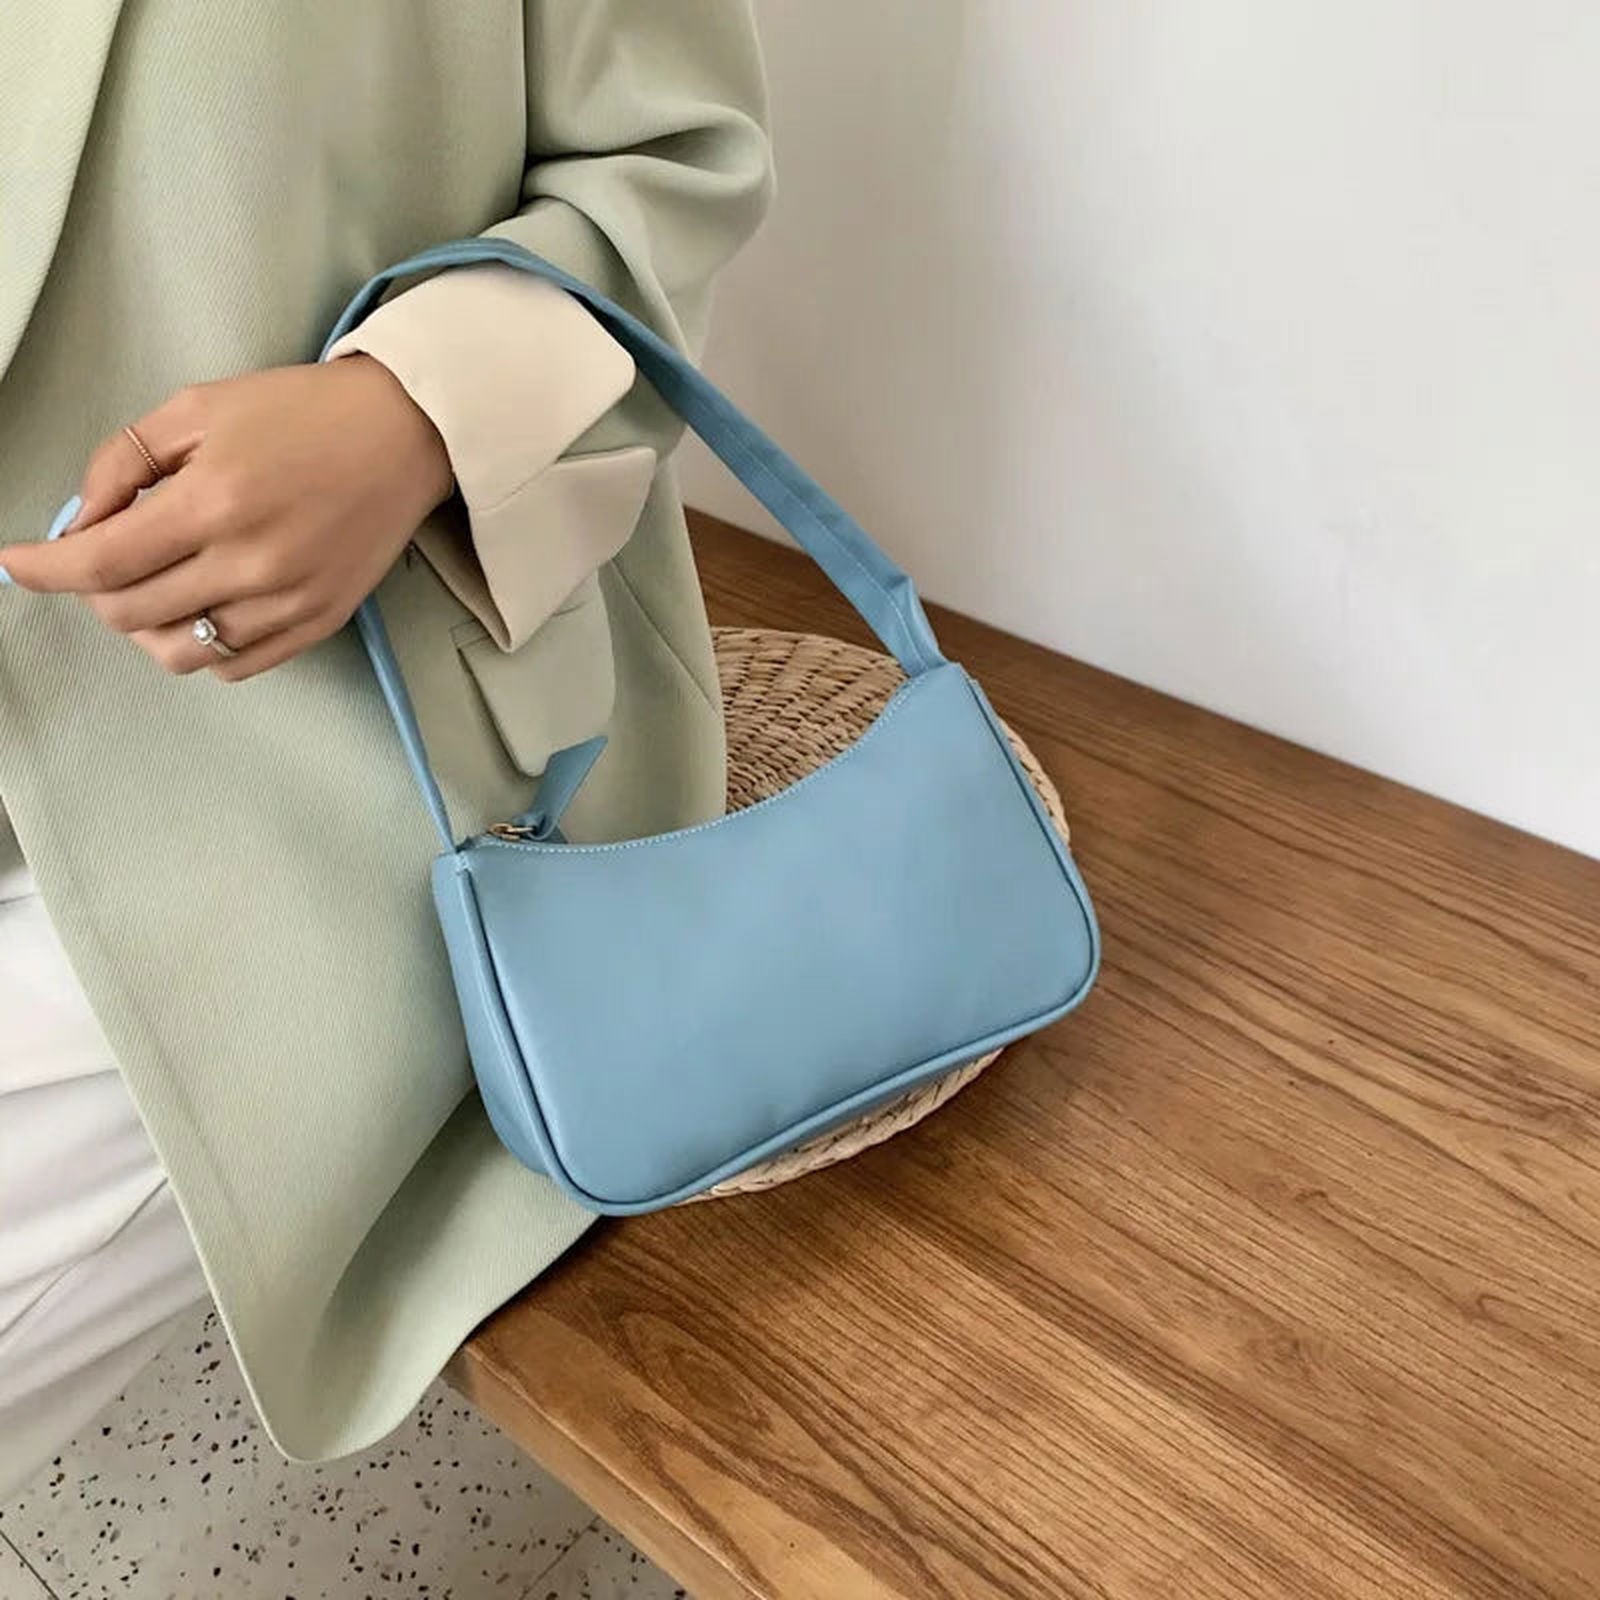 Totes Bags for Women New Trendy Vintage Handbag Female Small Subaxillary Bags Casual Mini Shoulder Bag - ARCHE